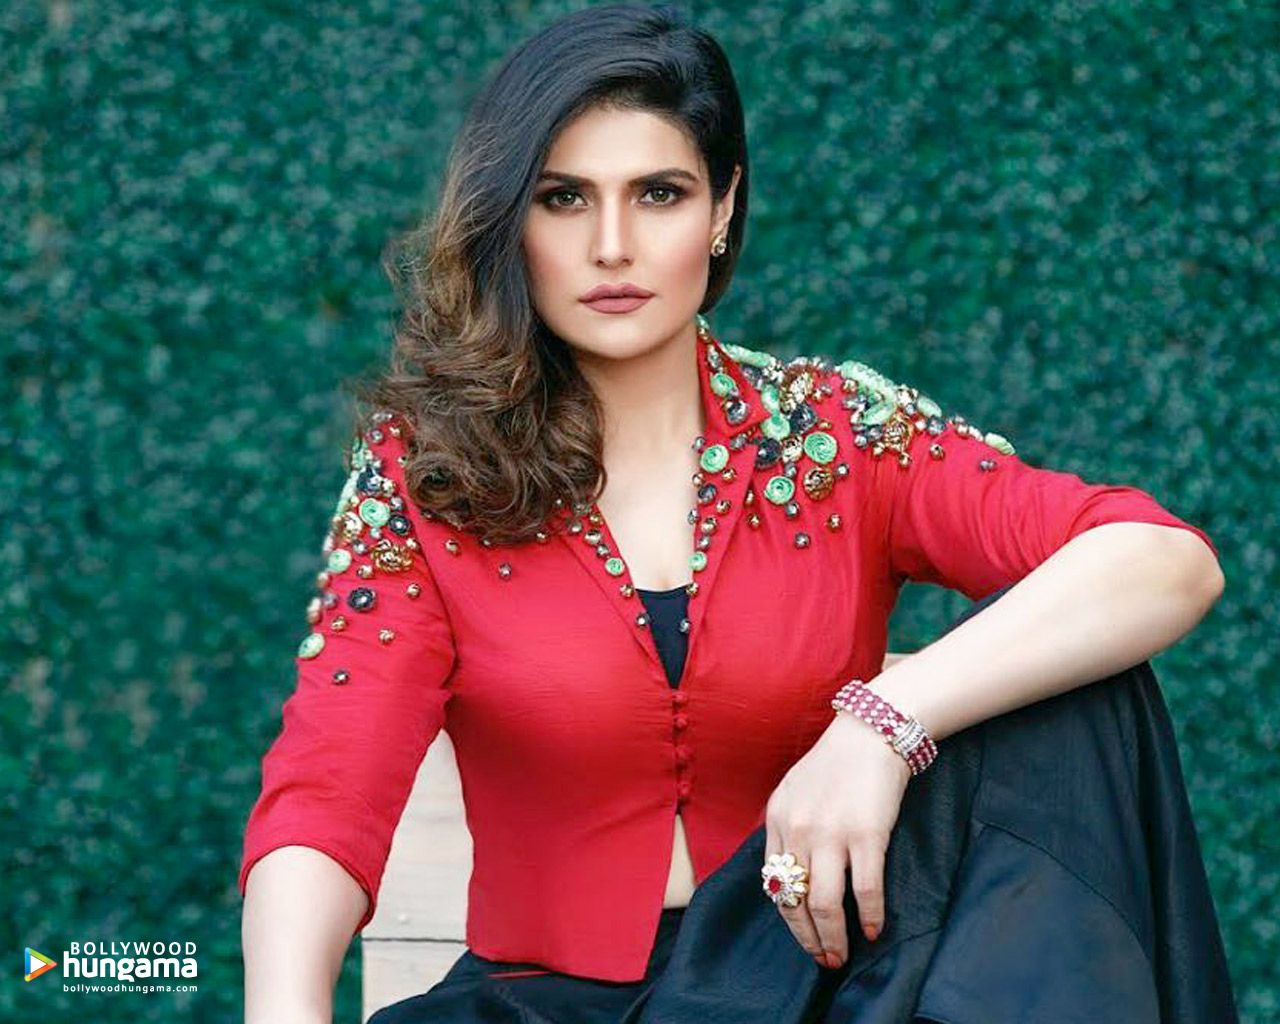 Zareen Khan launches her YouTube channel. The Rahnuma Daily